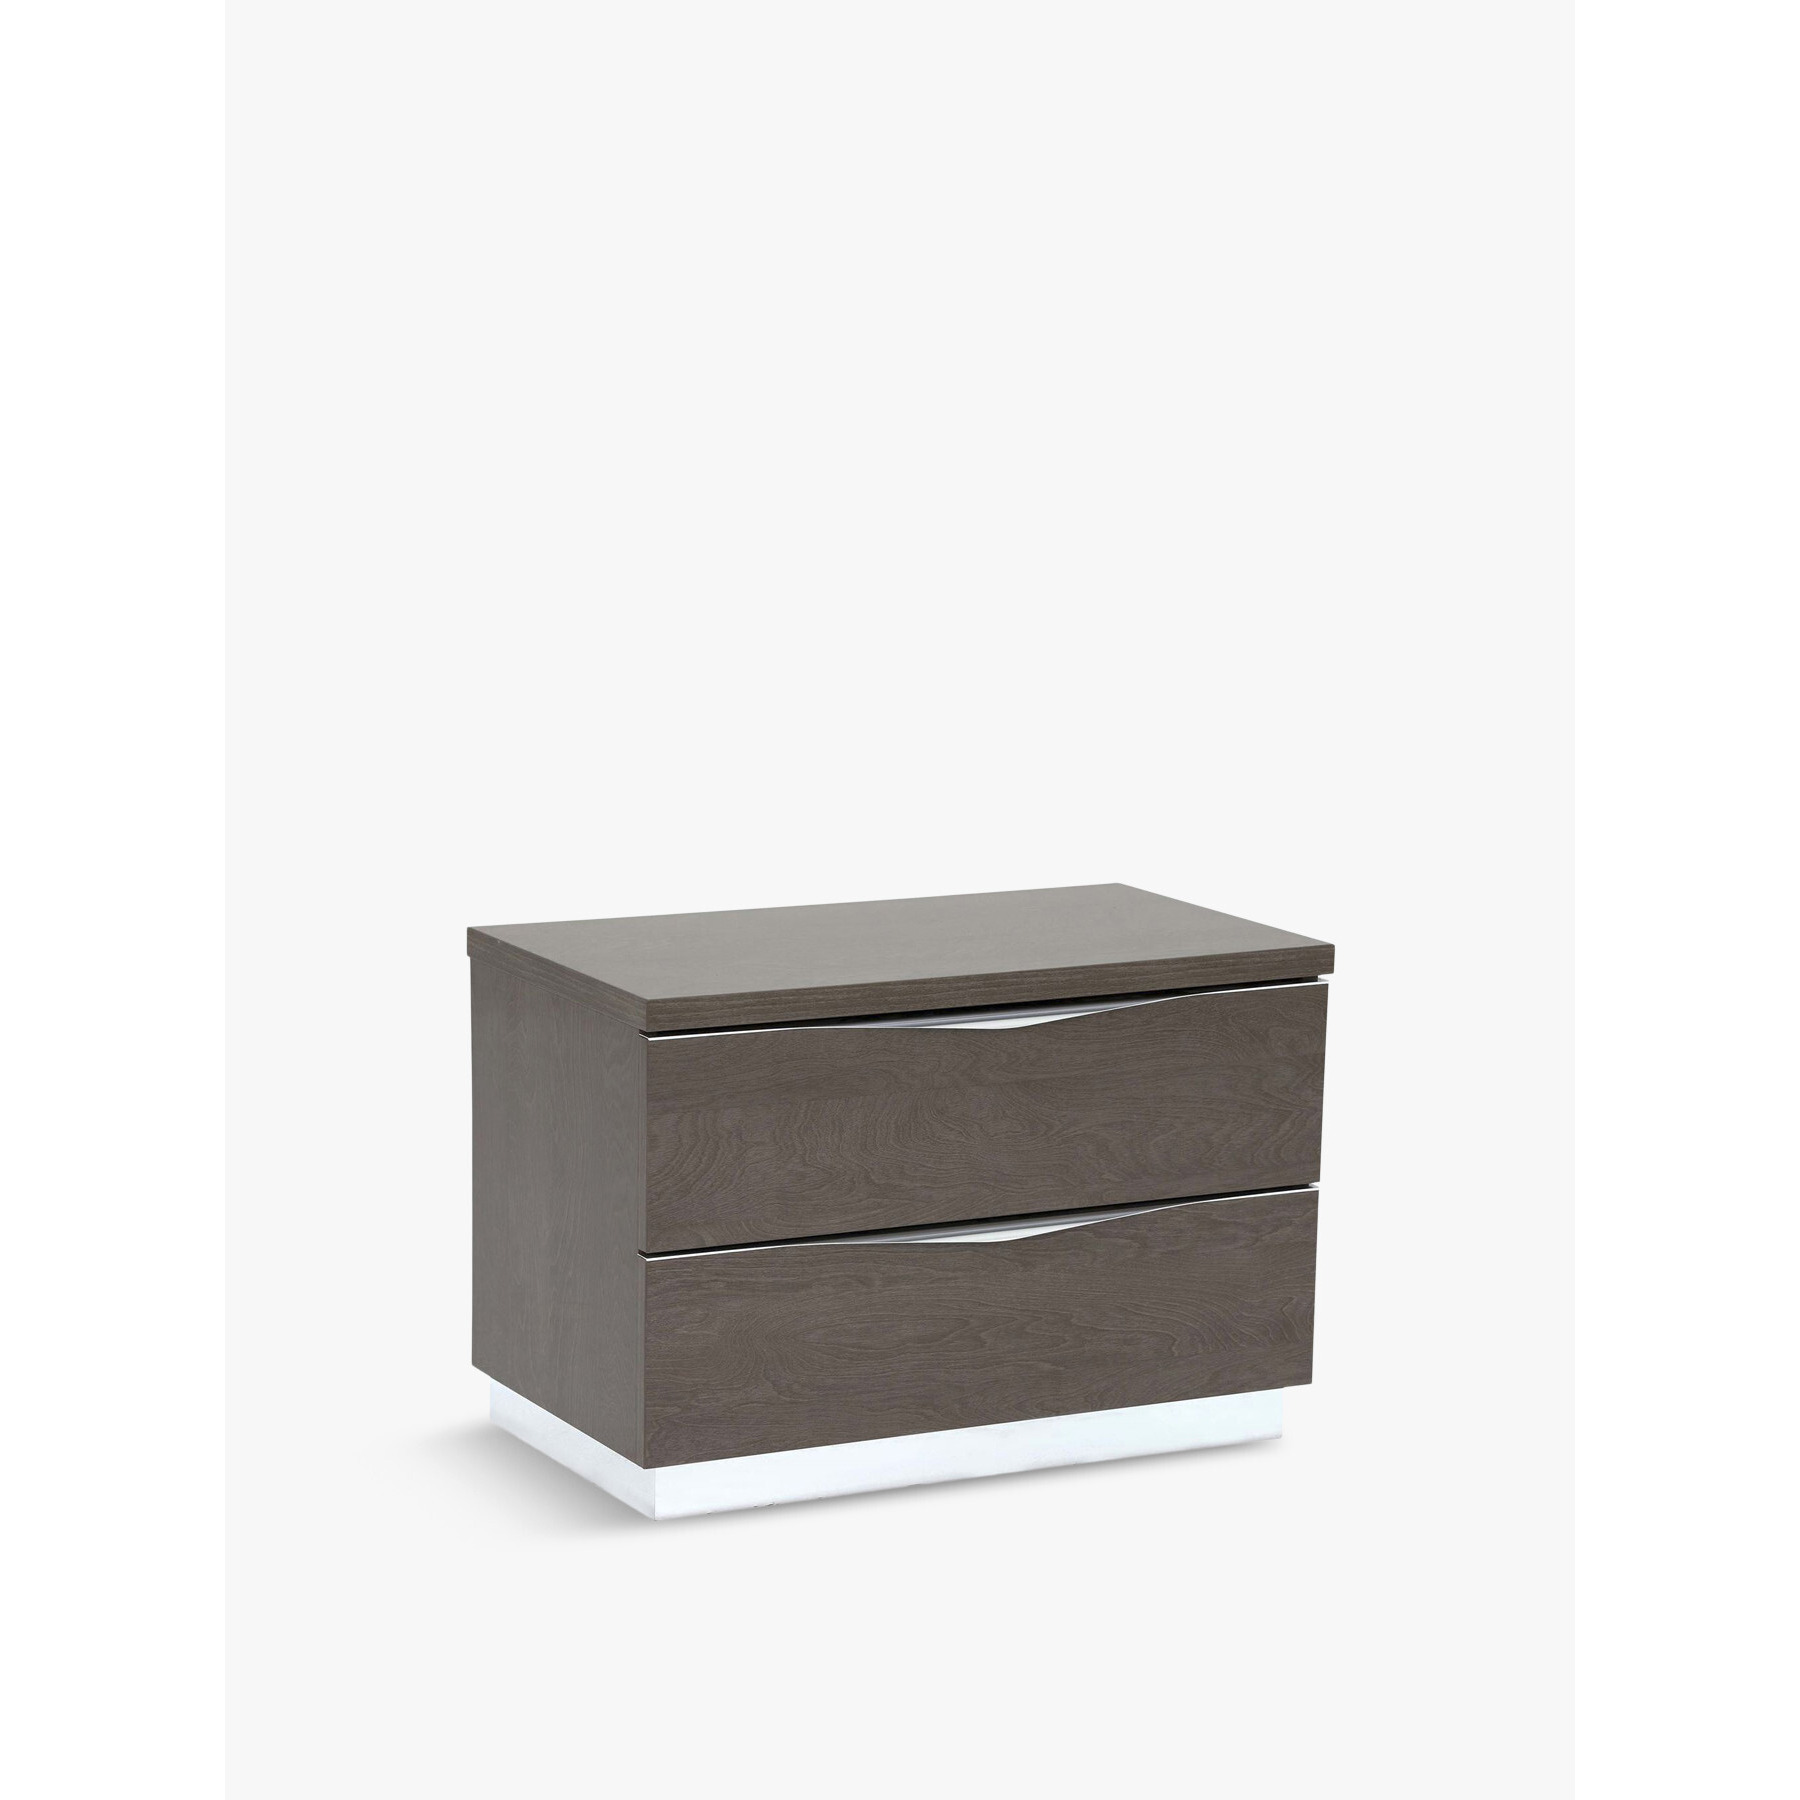 Barker and Stonehouse Lutyen Large Bedside Table, Grey and Taupe - image 1